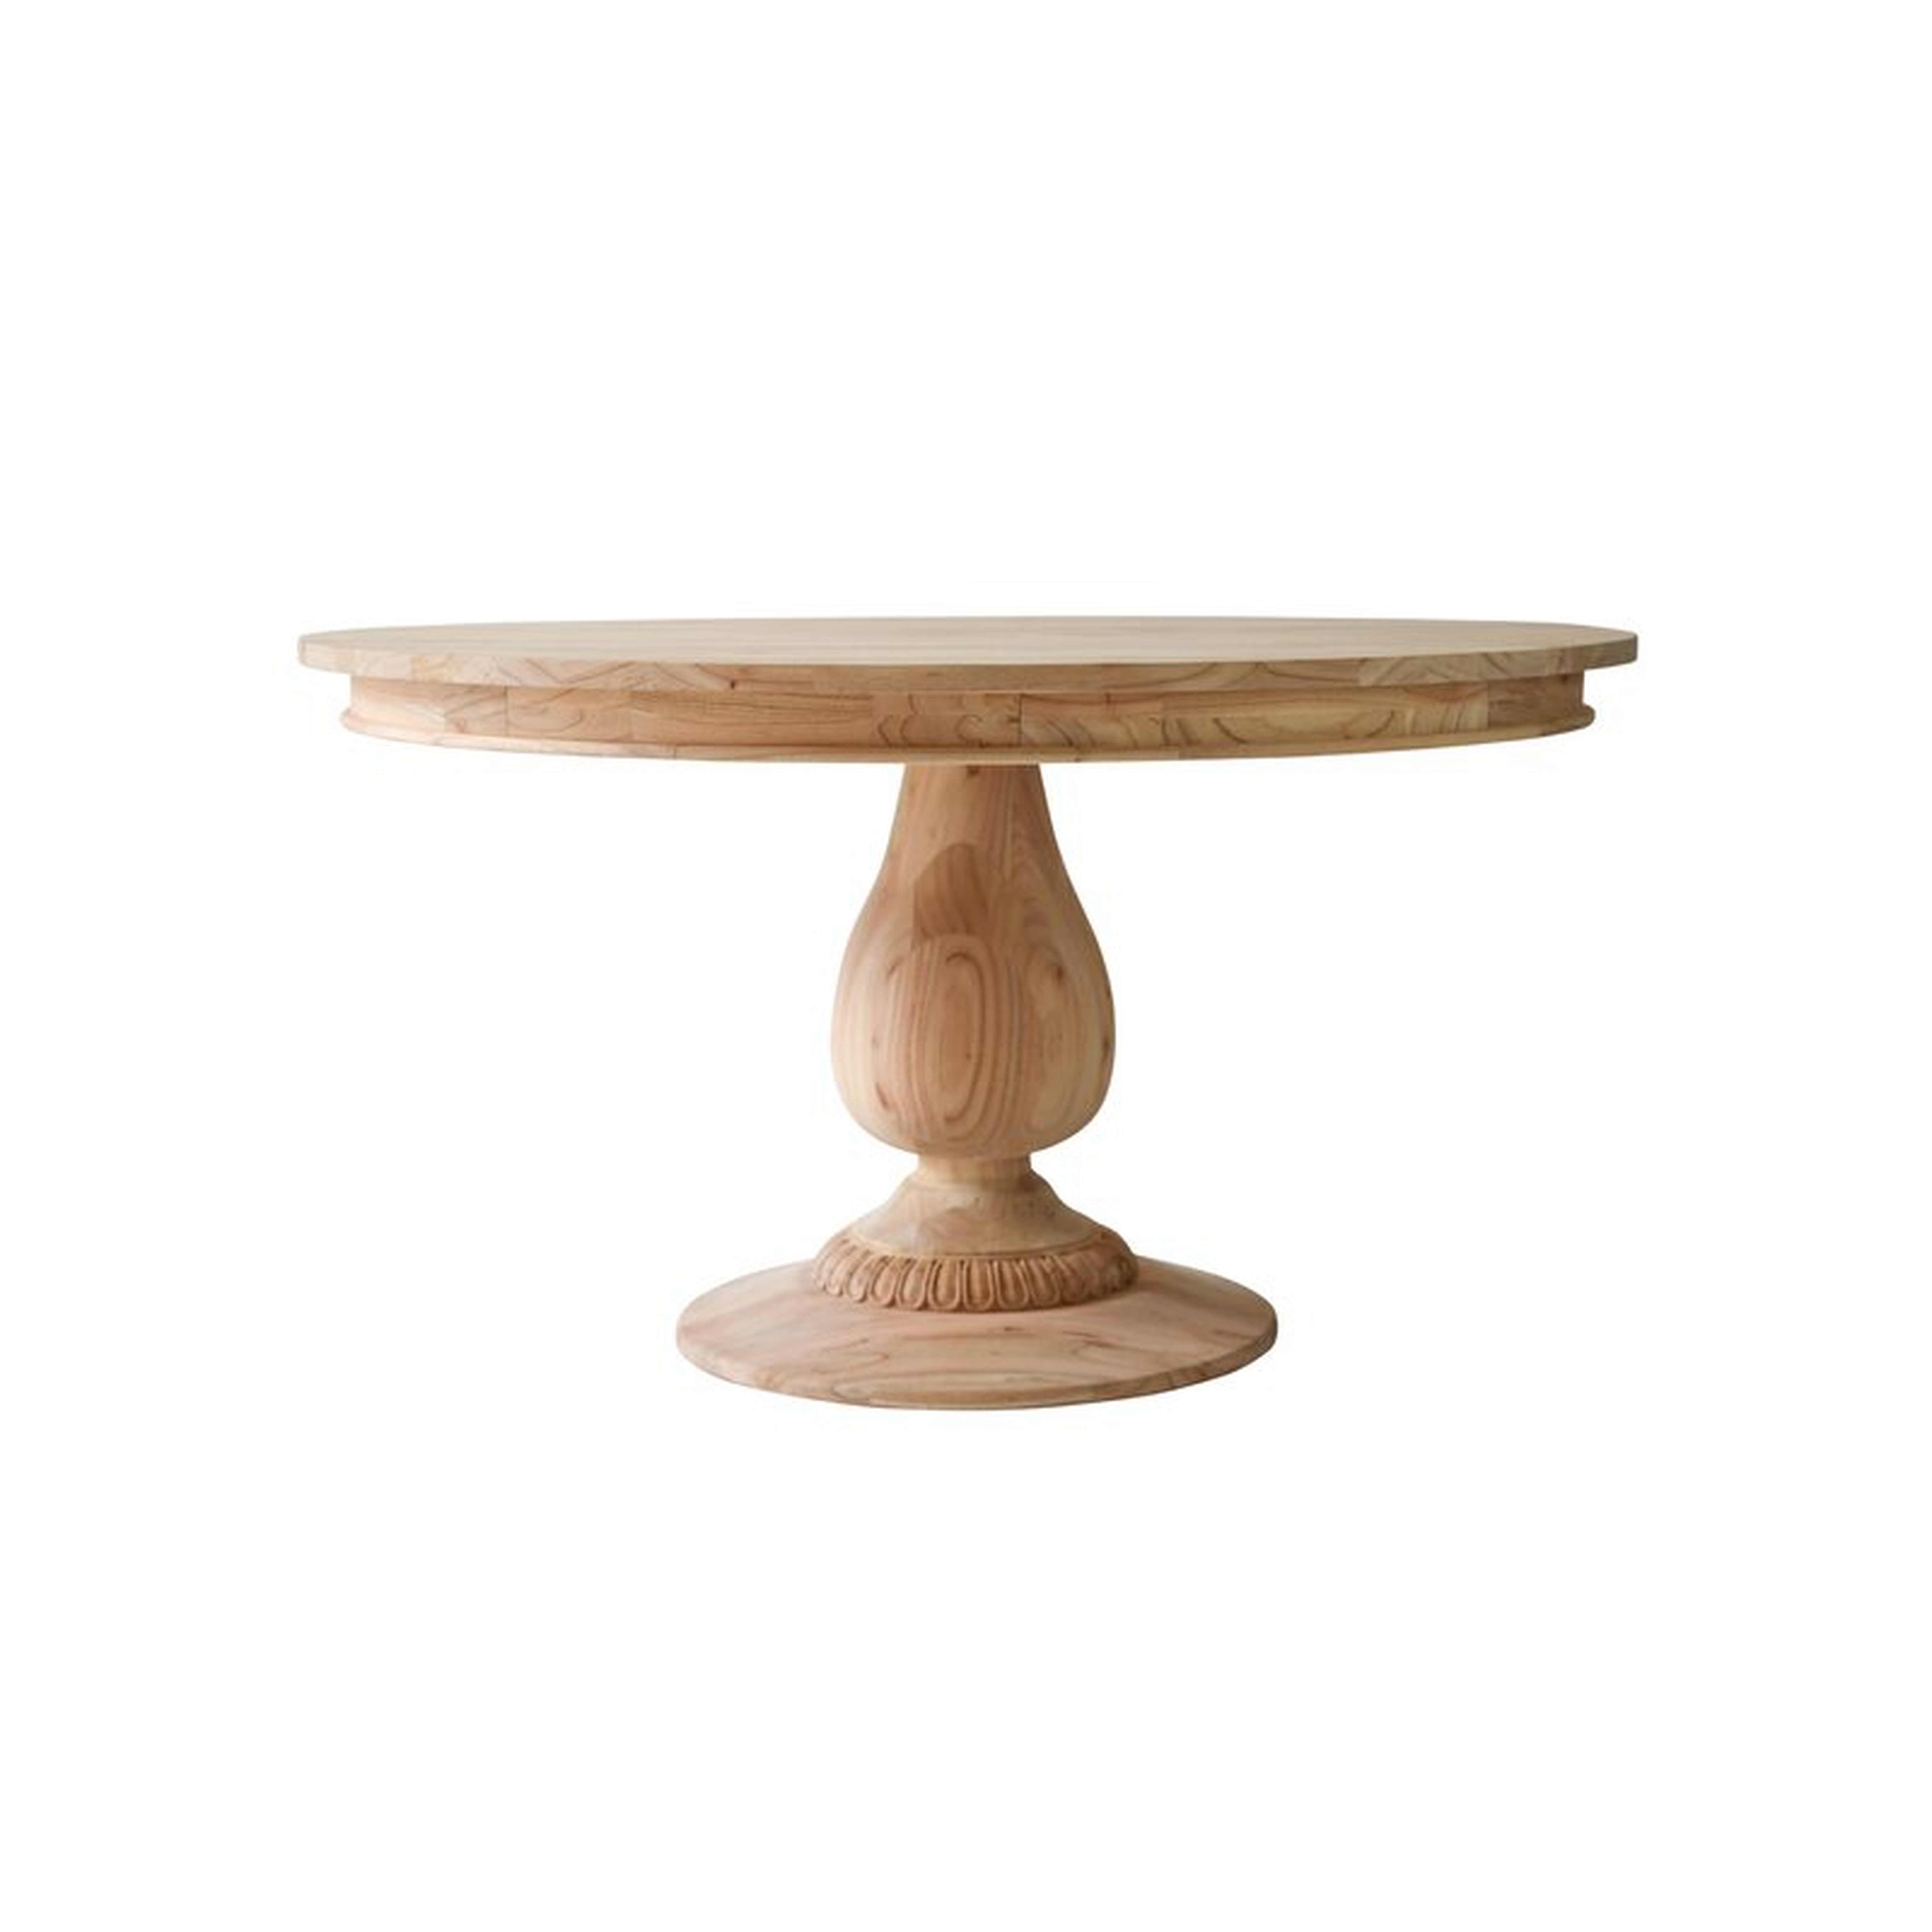 Ave Home Raw Charlotte Pedestal Dining Table Size: 30" H x 55" L x 55" W - Perigold